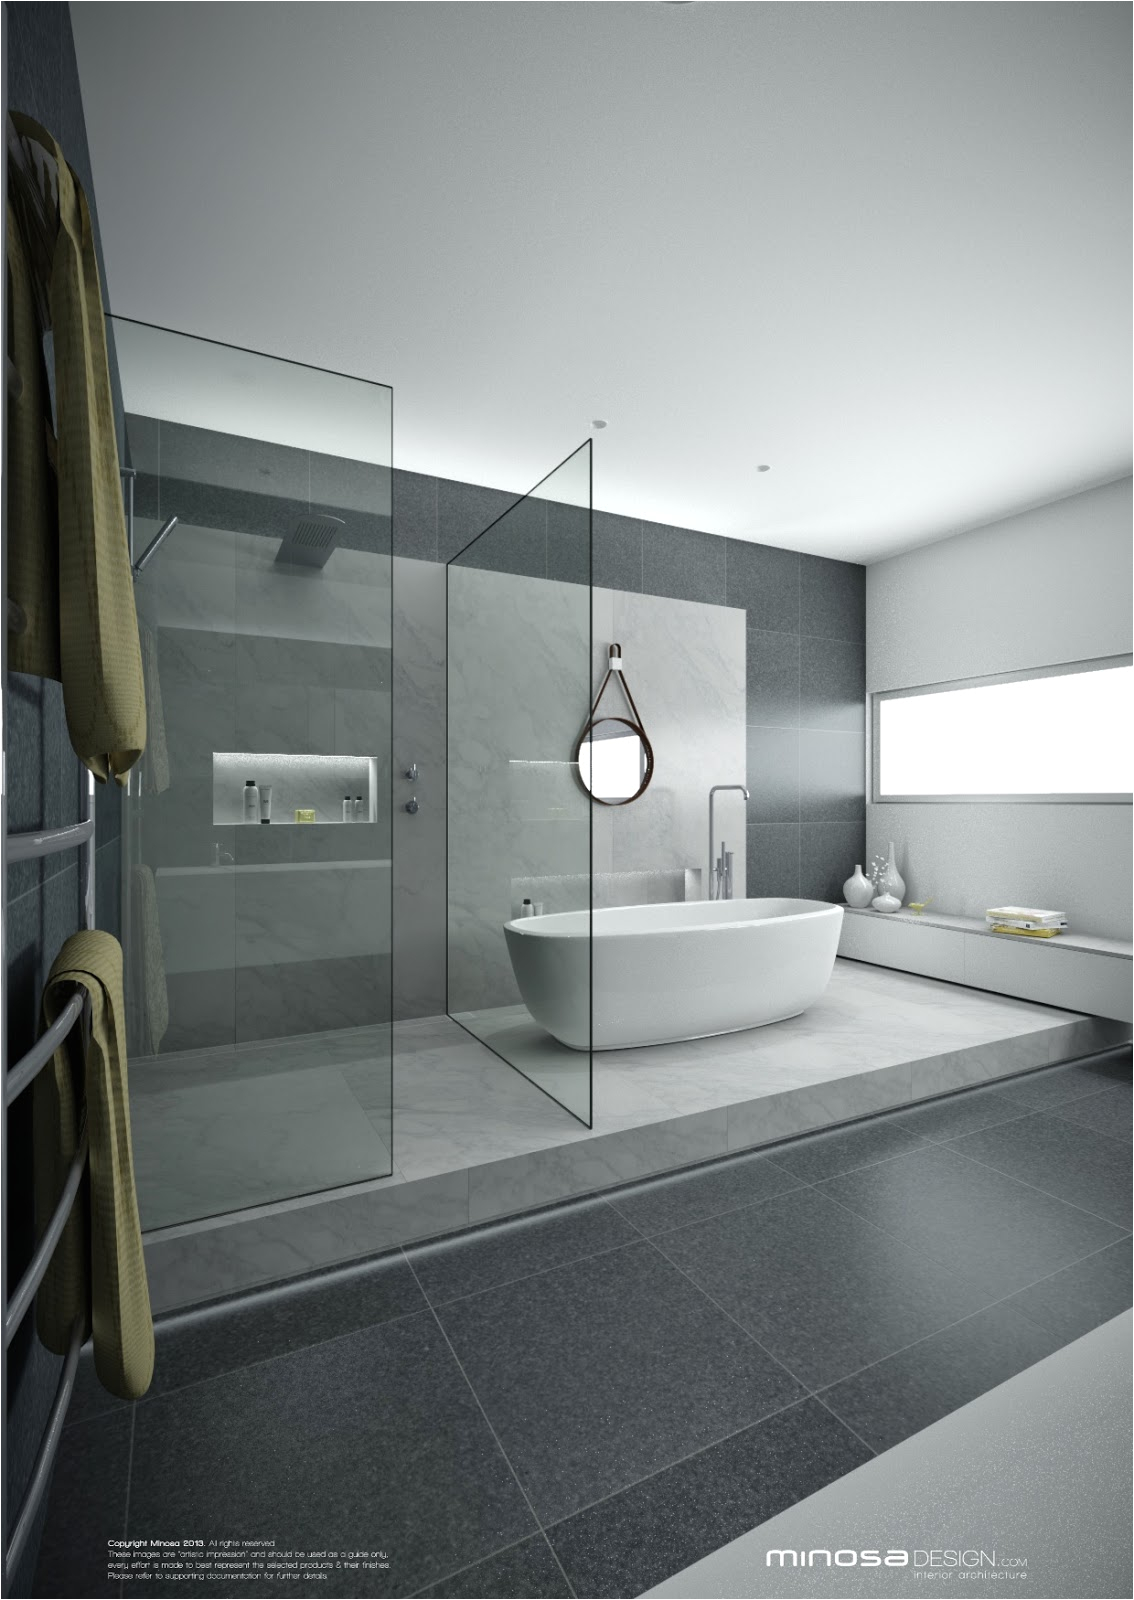 a real showstopper modern bathroom